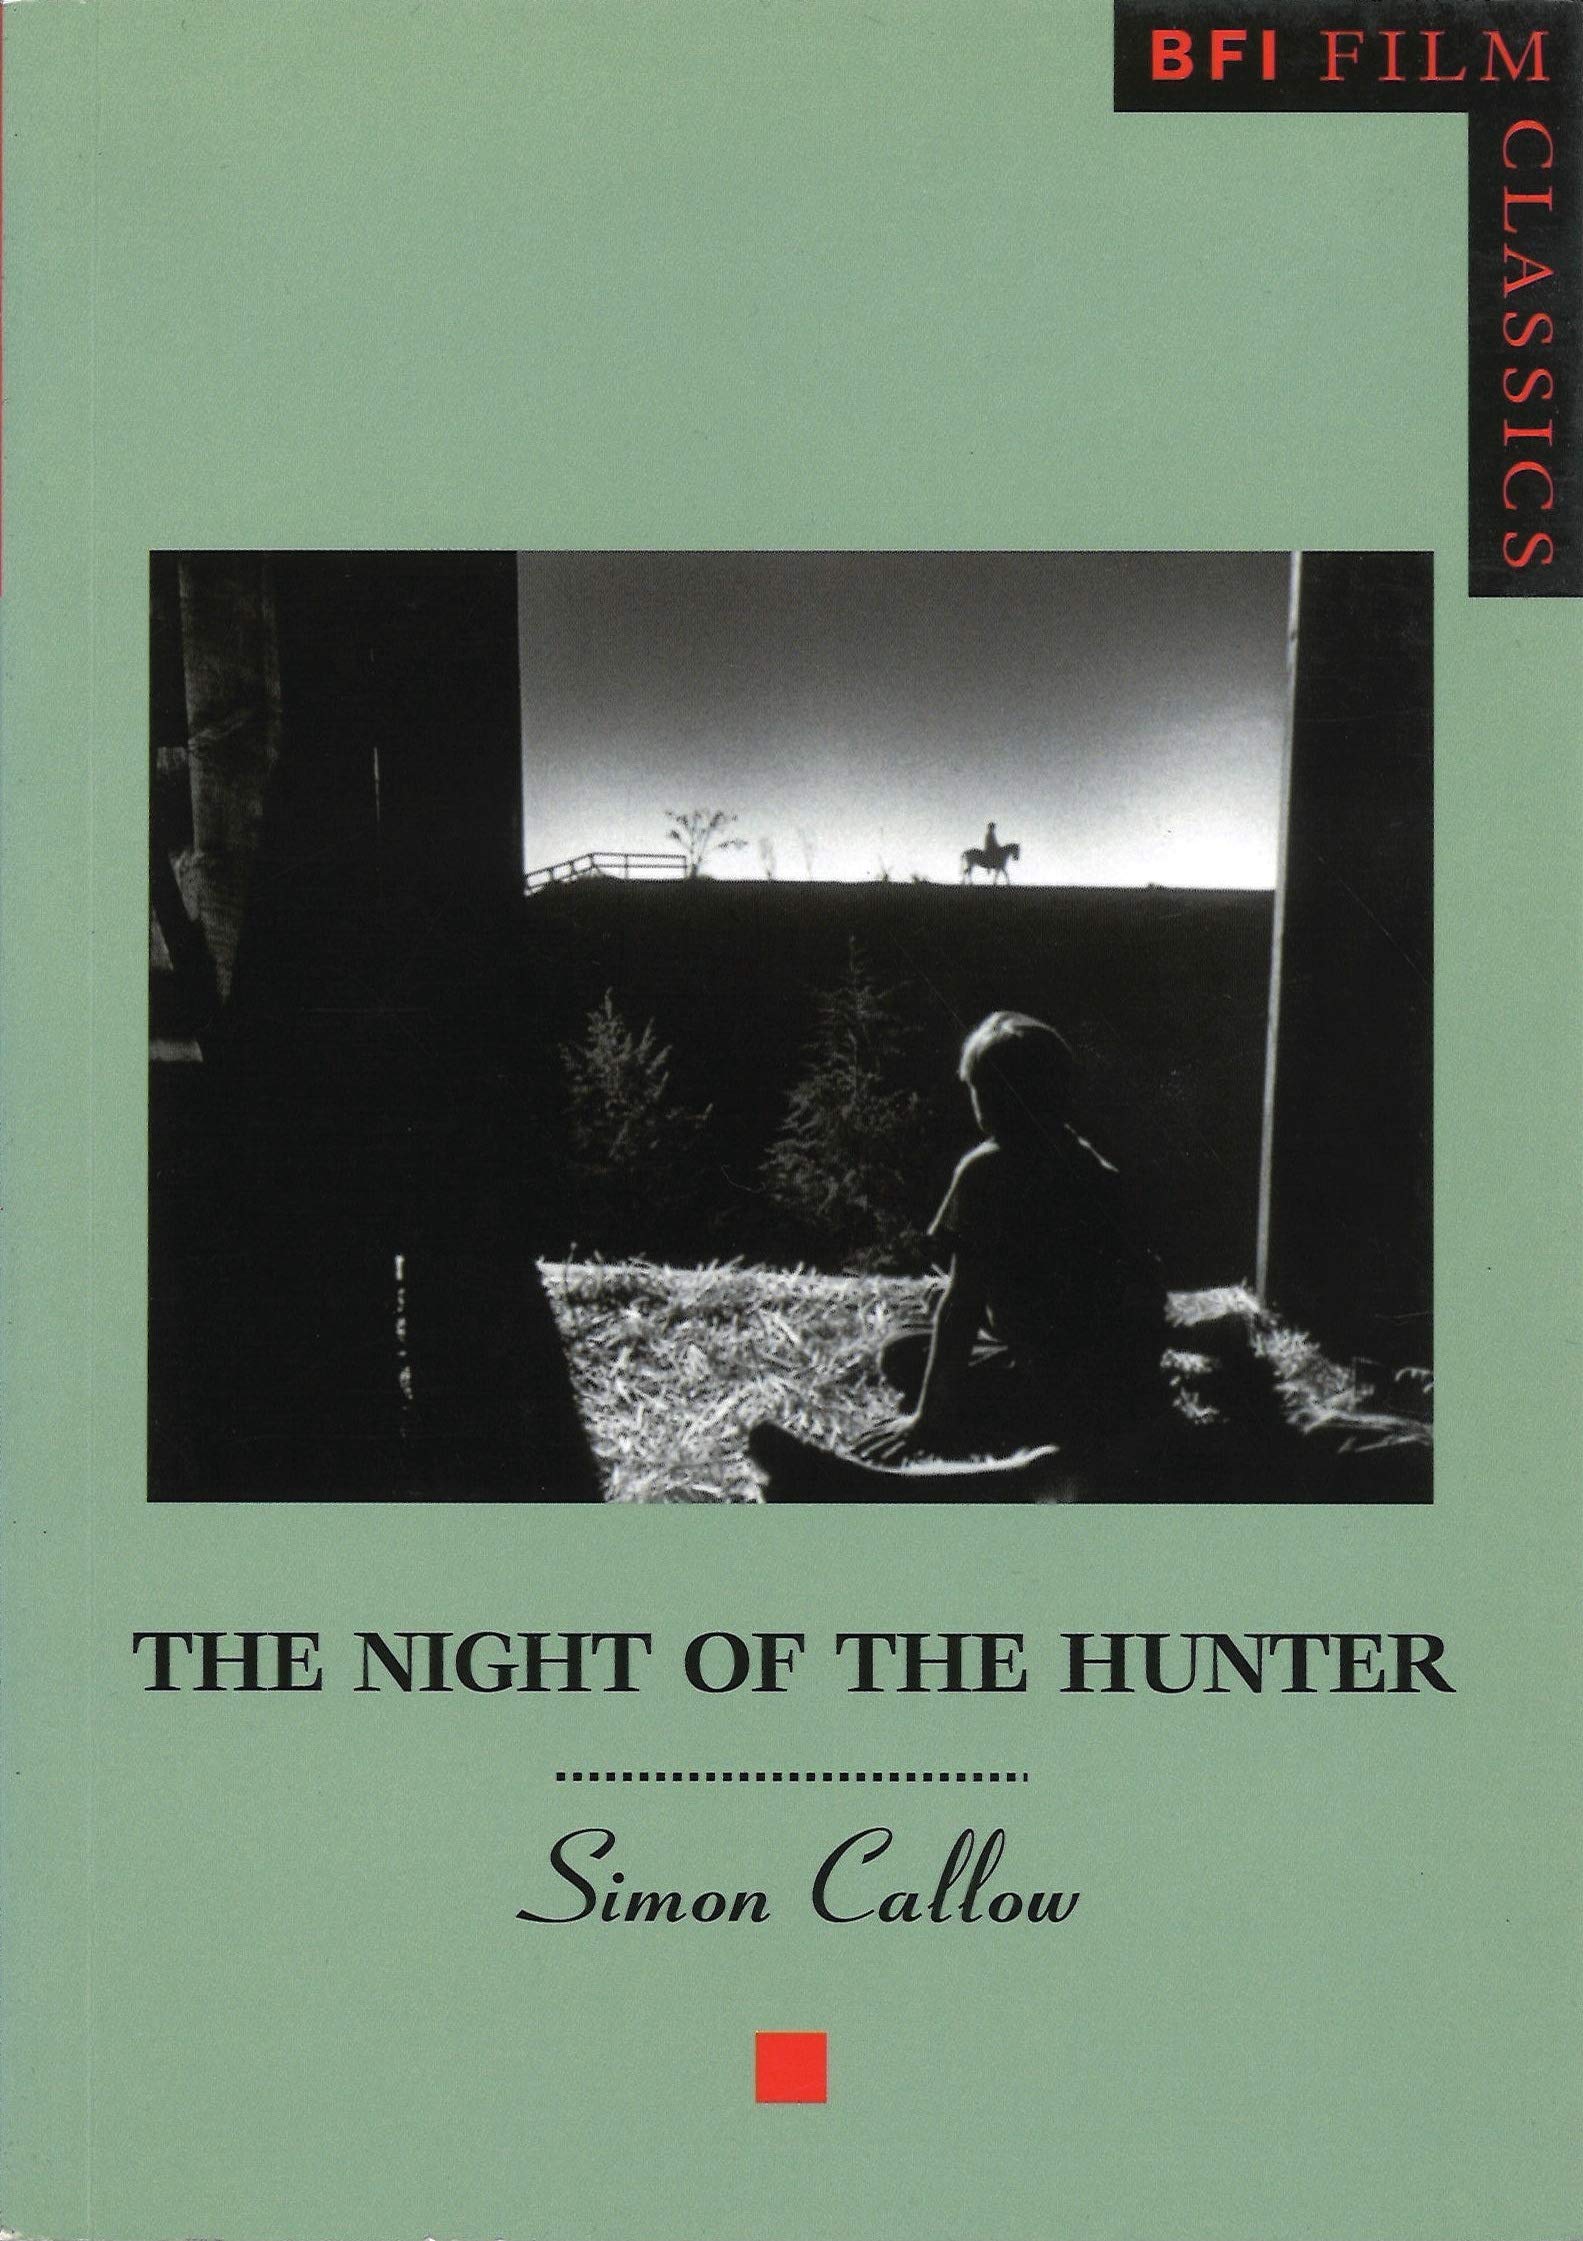 The Night of the Hunter by Simon Callow.